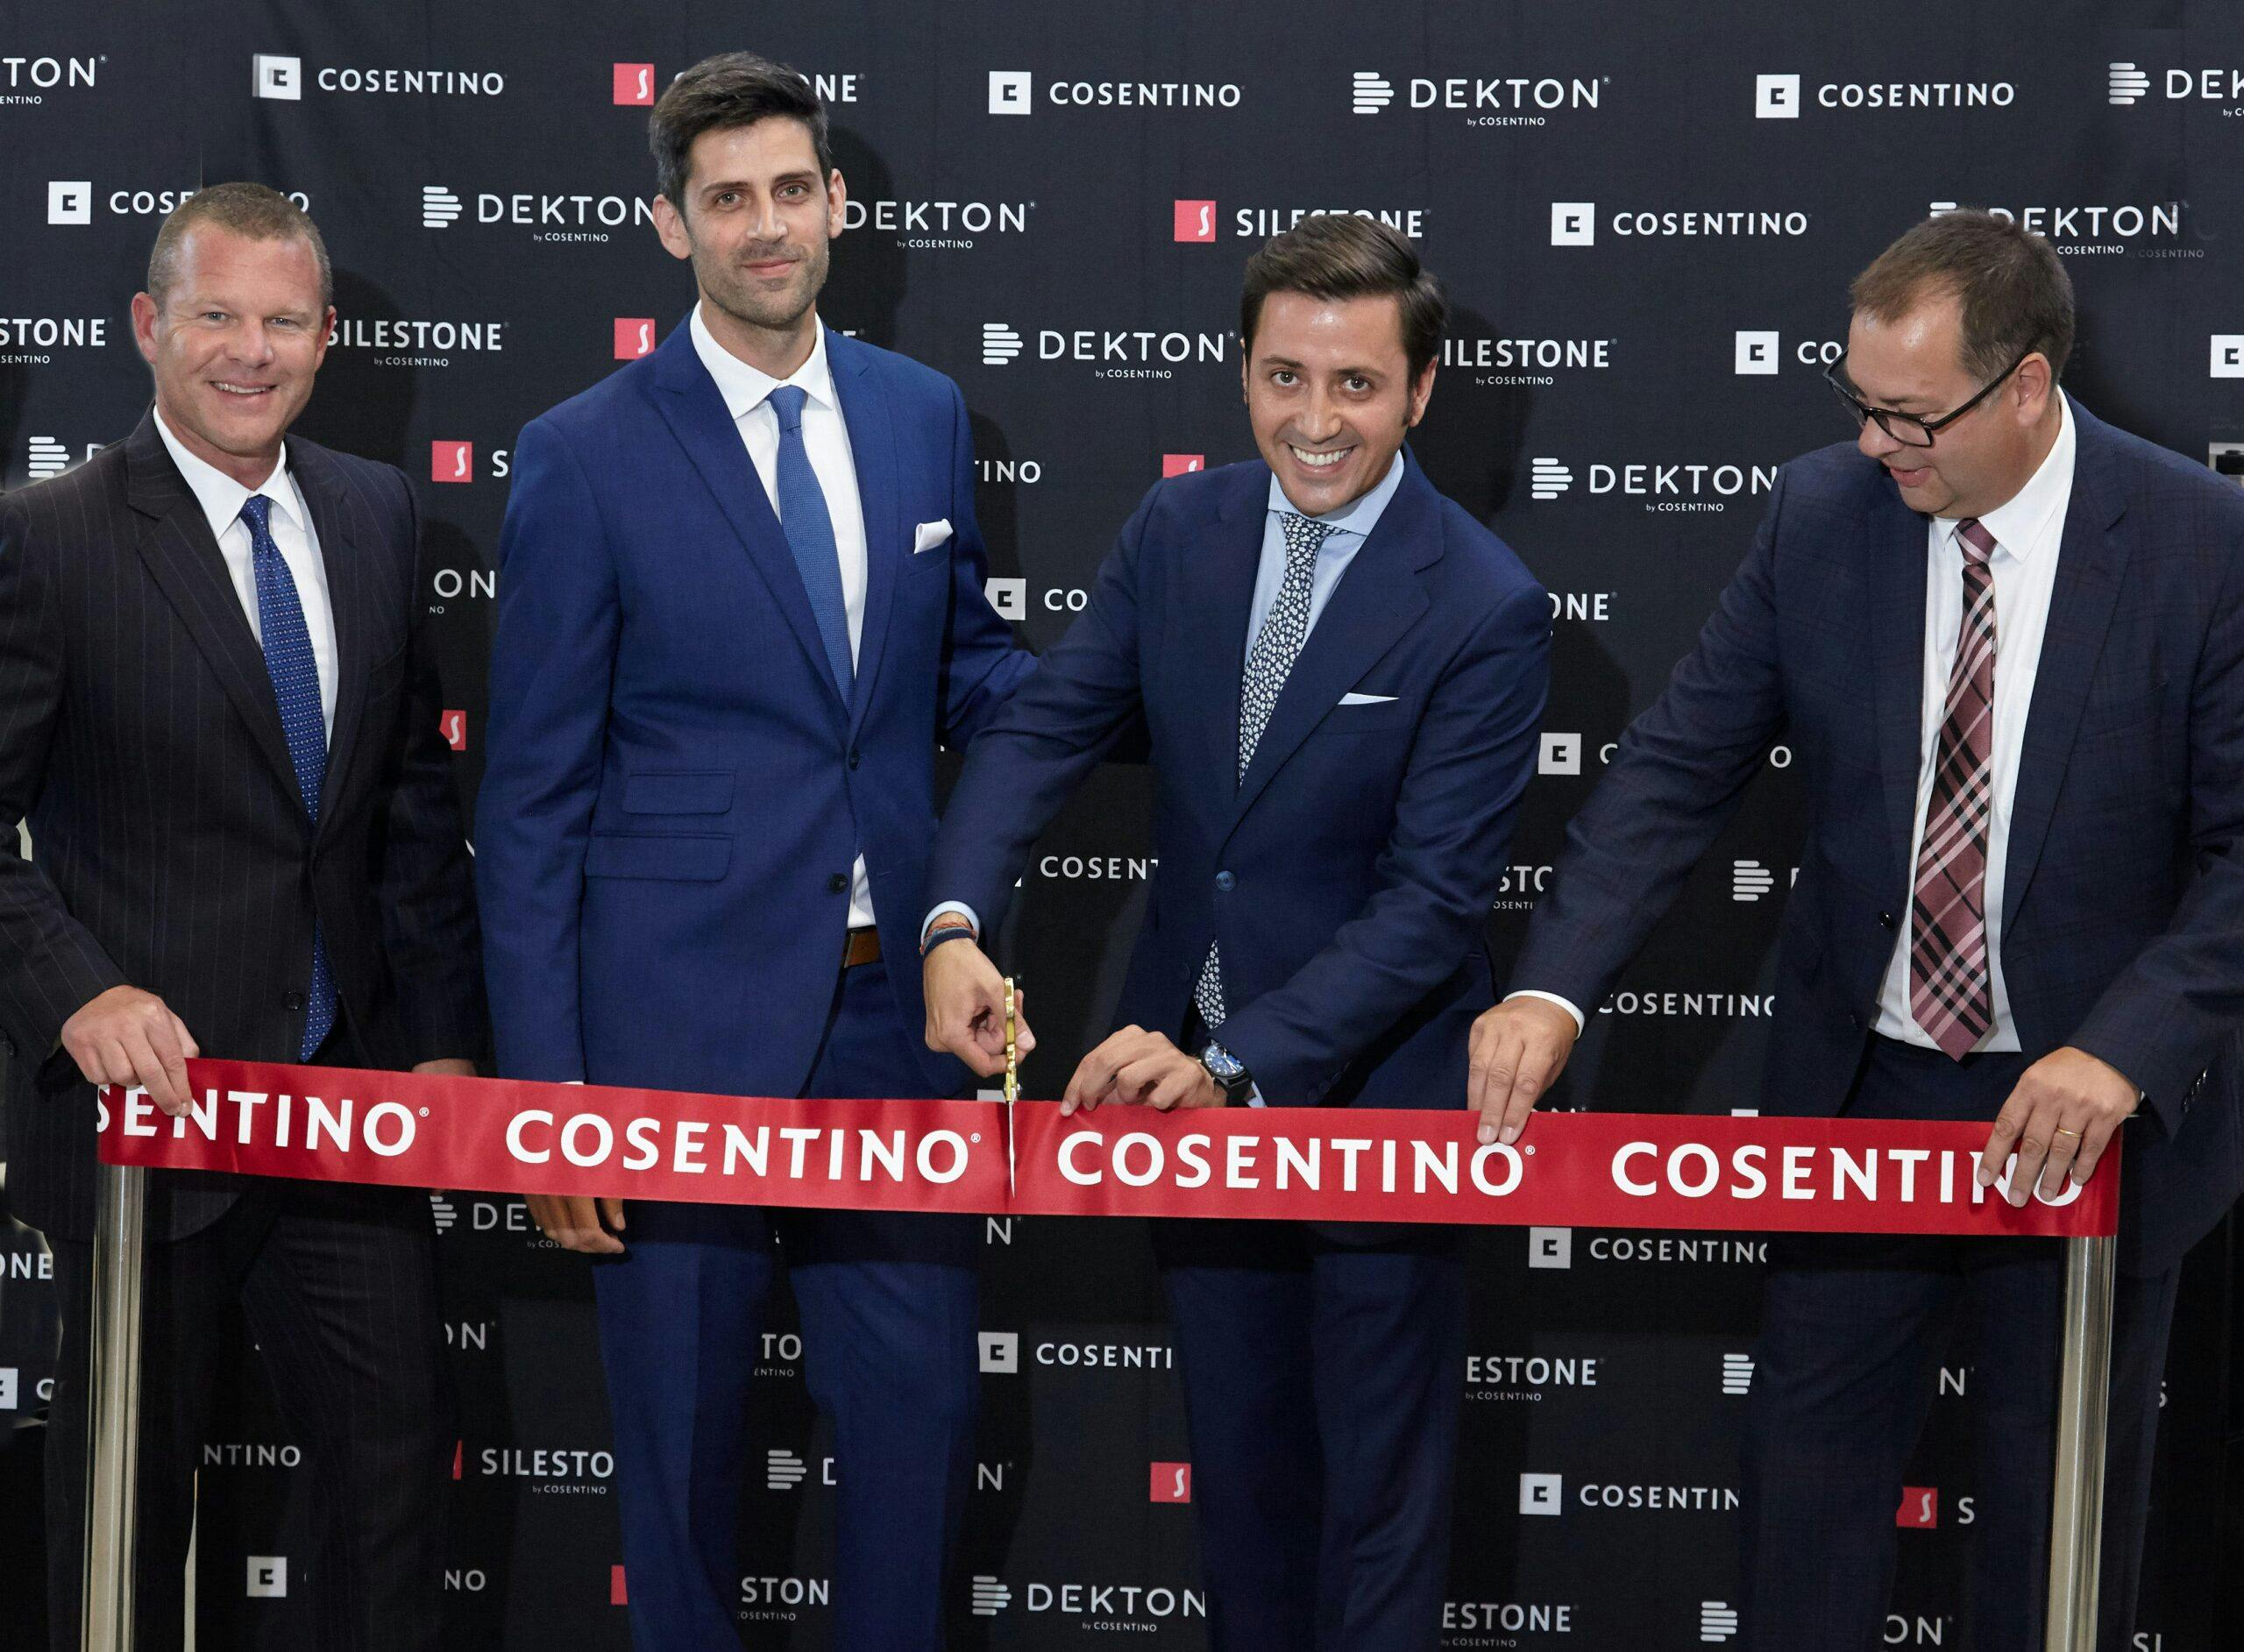 Image 33 of Cosentino Vancouver Center Opening 2018 2 1 scaled in Cosentino Officially Opens New Vancouver Centre Showroom - Cosentino